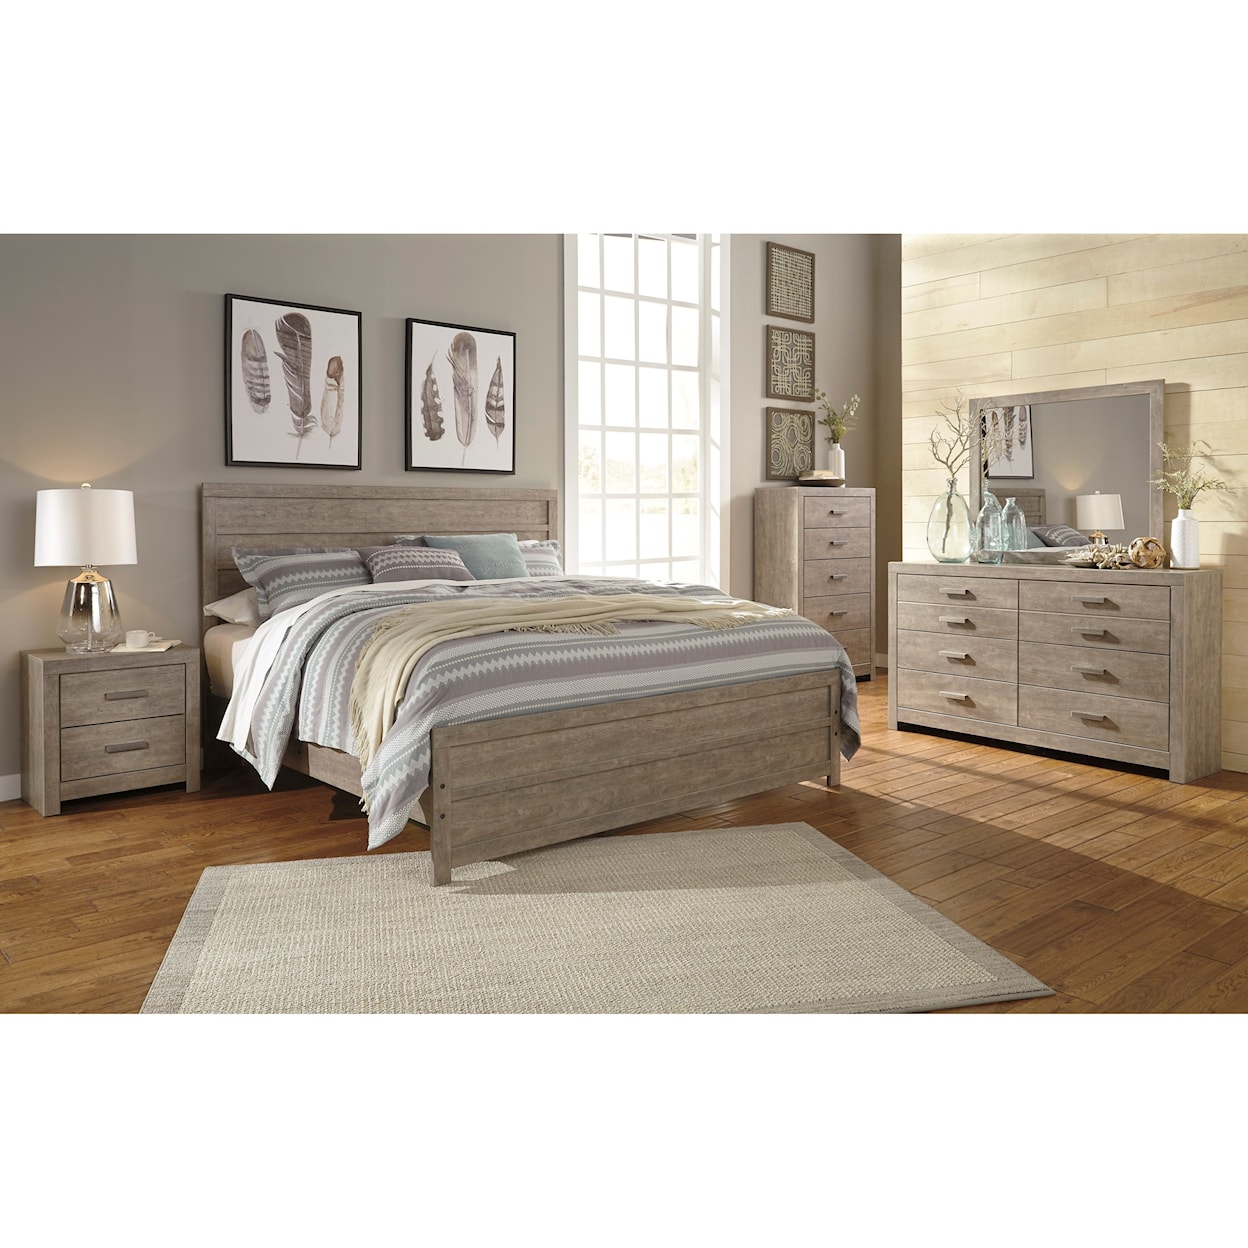 Signature Clover King Bedroom Group